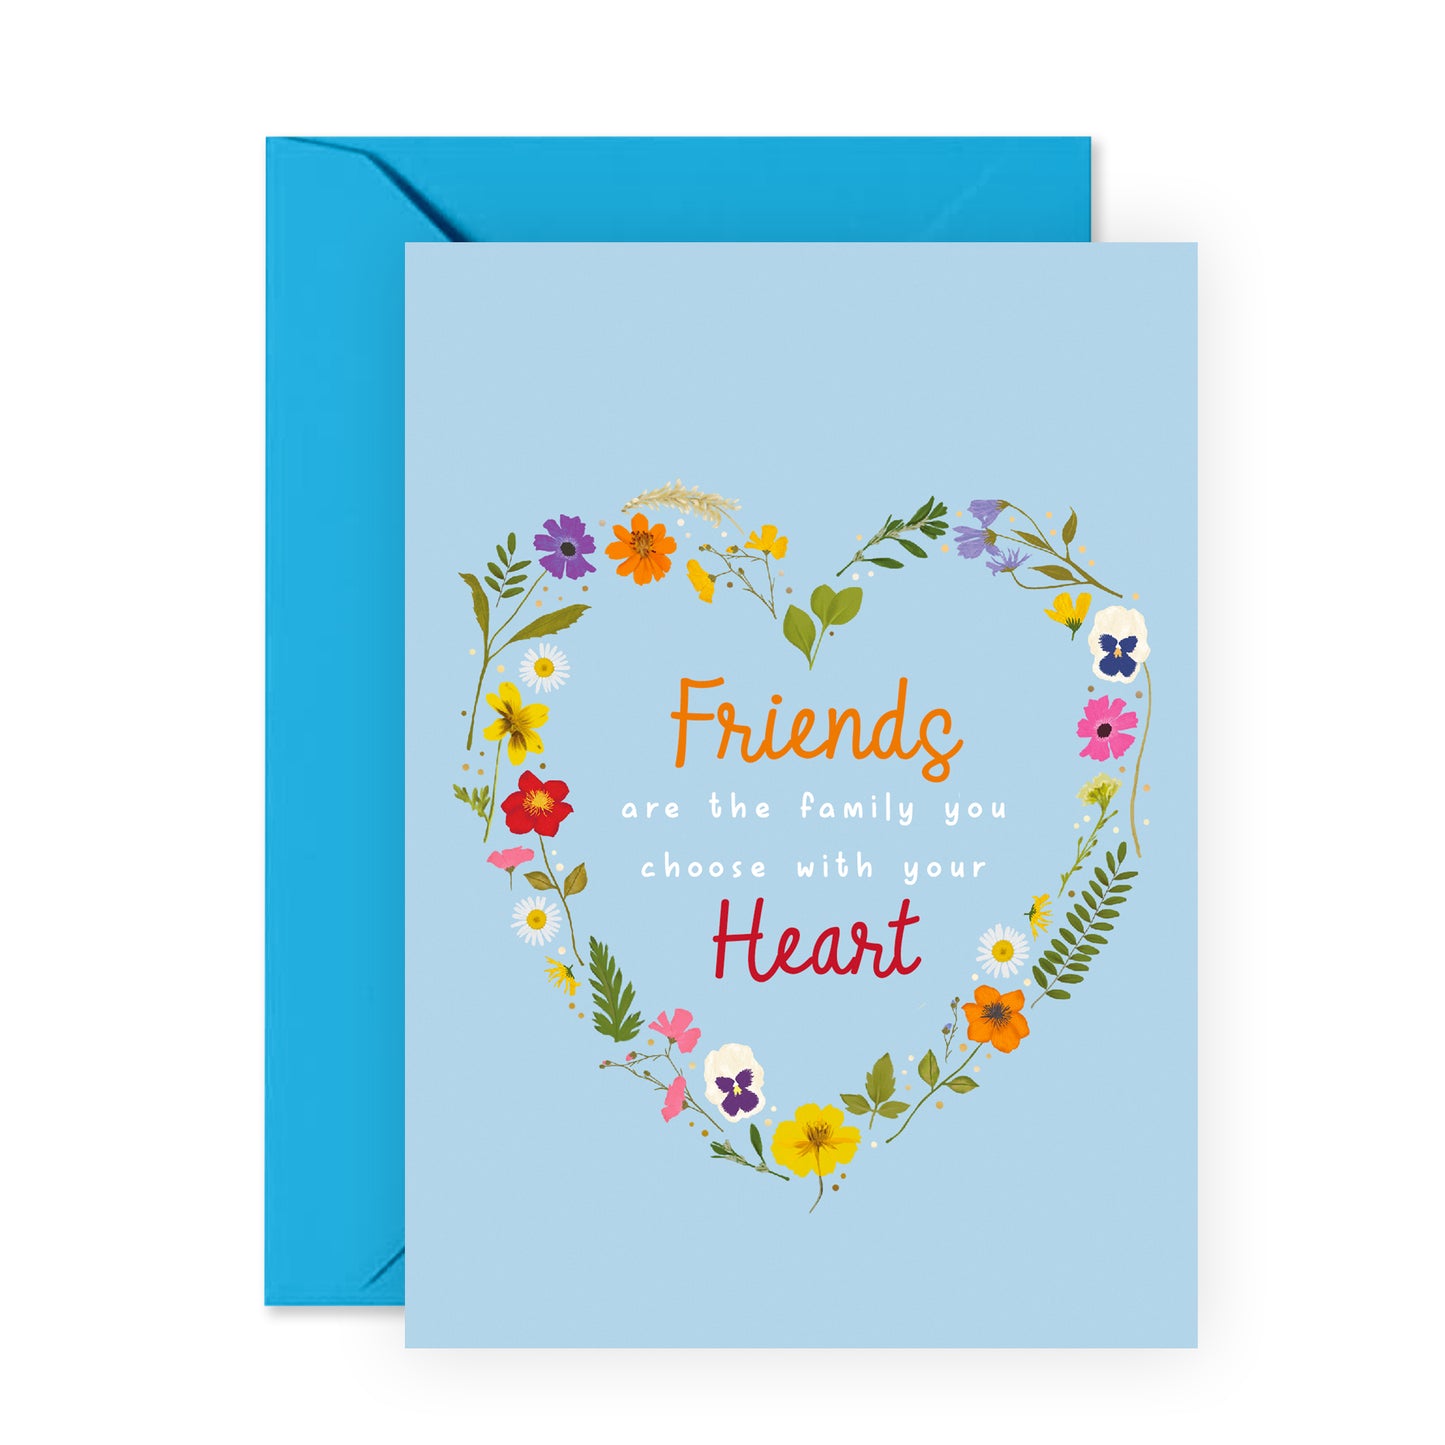 Sweet Birthday Card - Family You Choose With Your Heart - For Women Friends Her